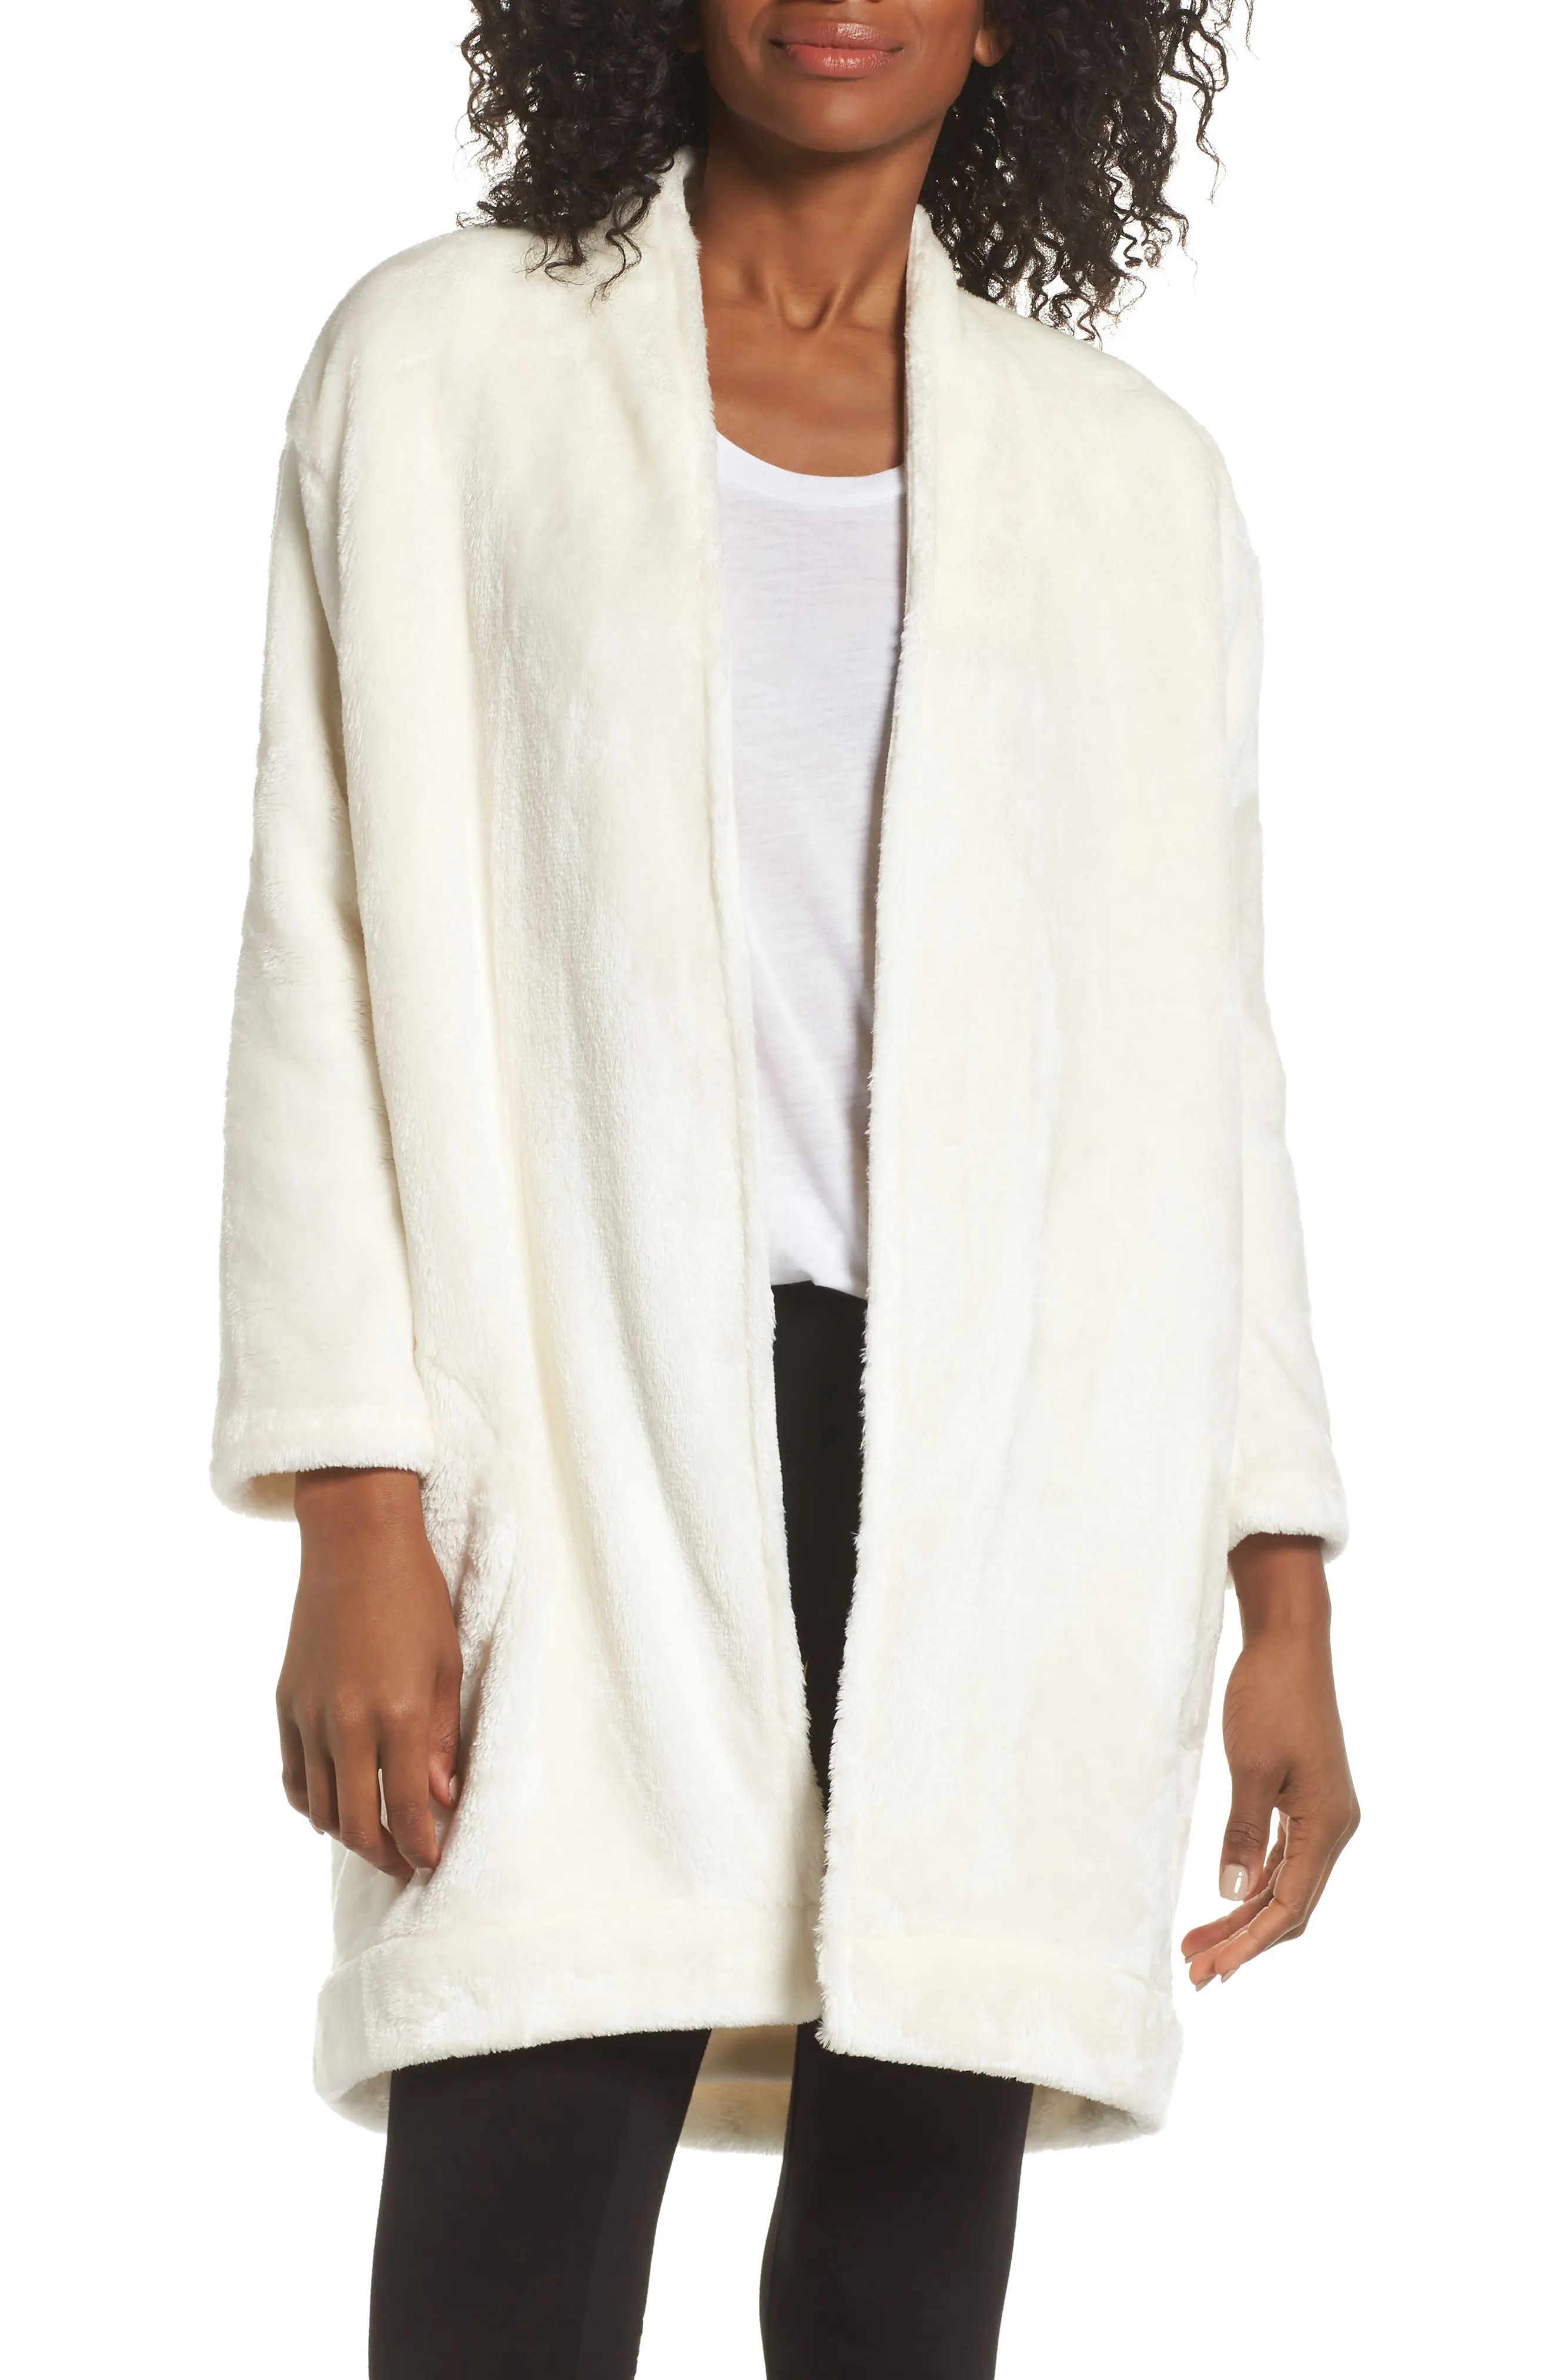 Women's Nordstrom Lingerie So Soft Plush Cocoon Cardigan, Size X-Small - Ivory | Nordstrom